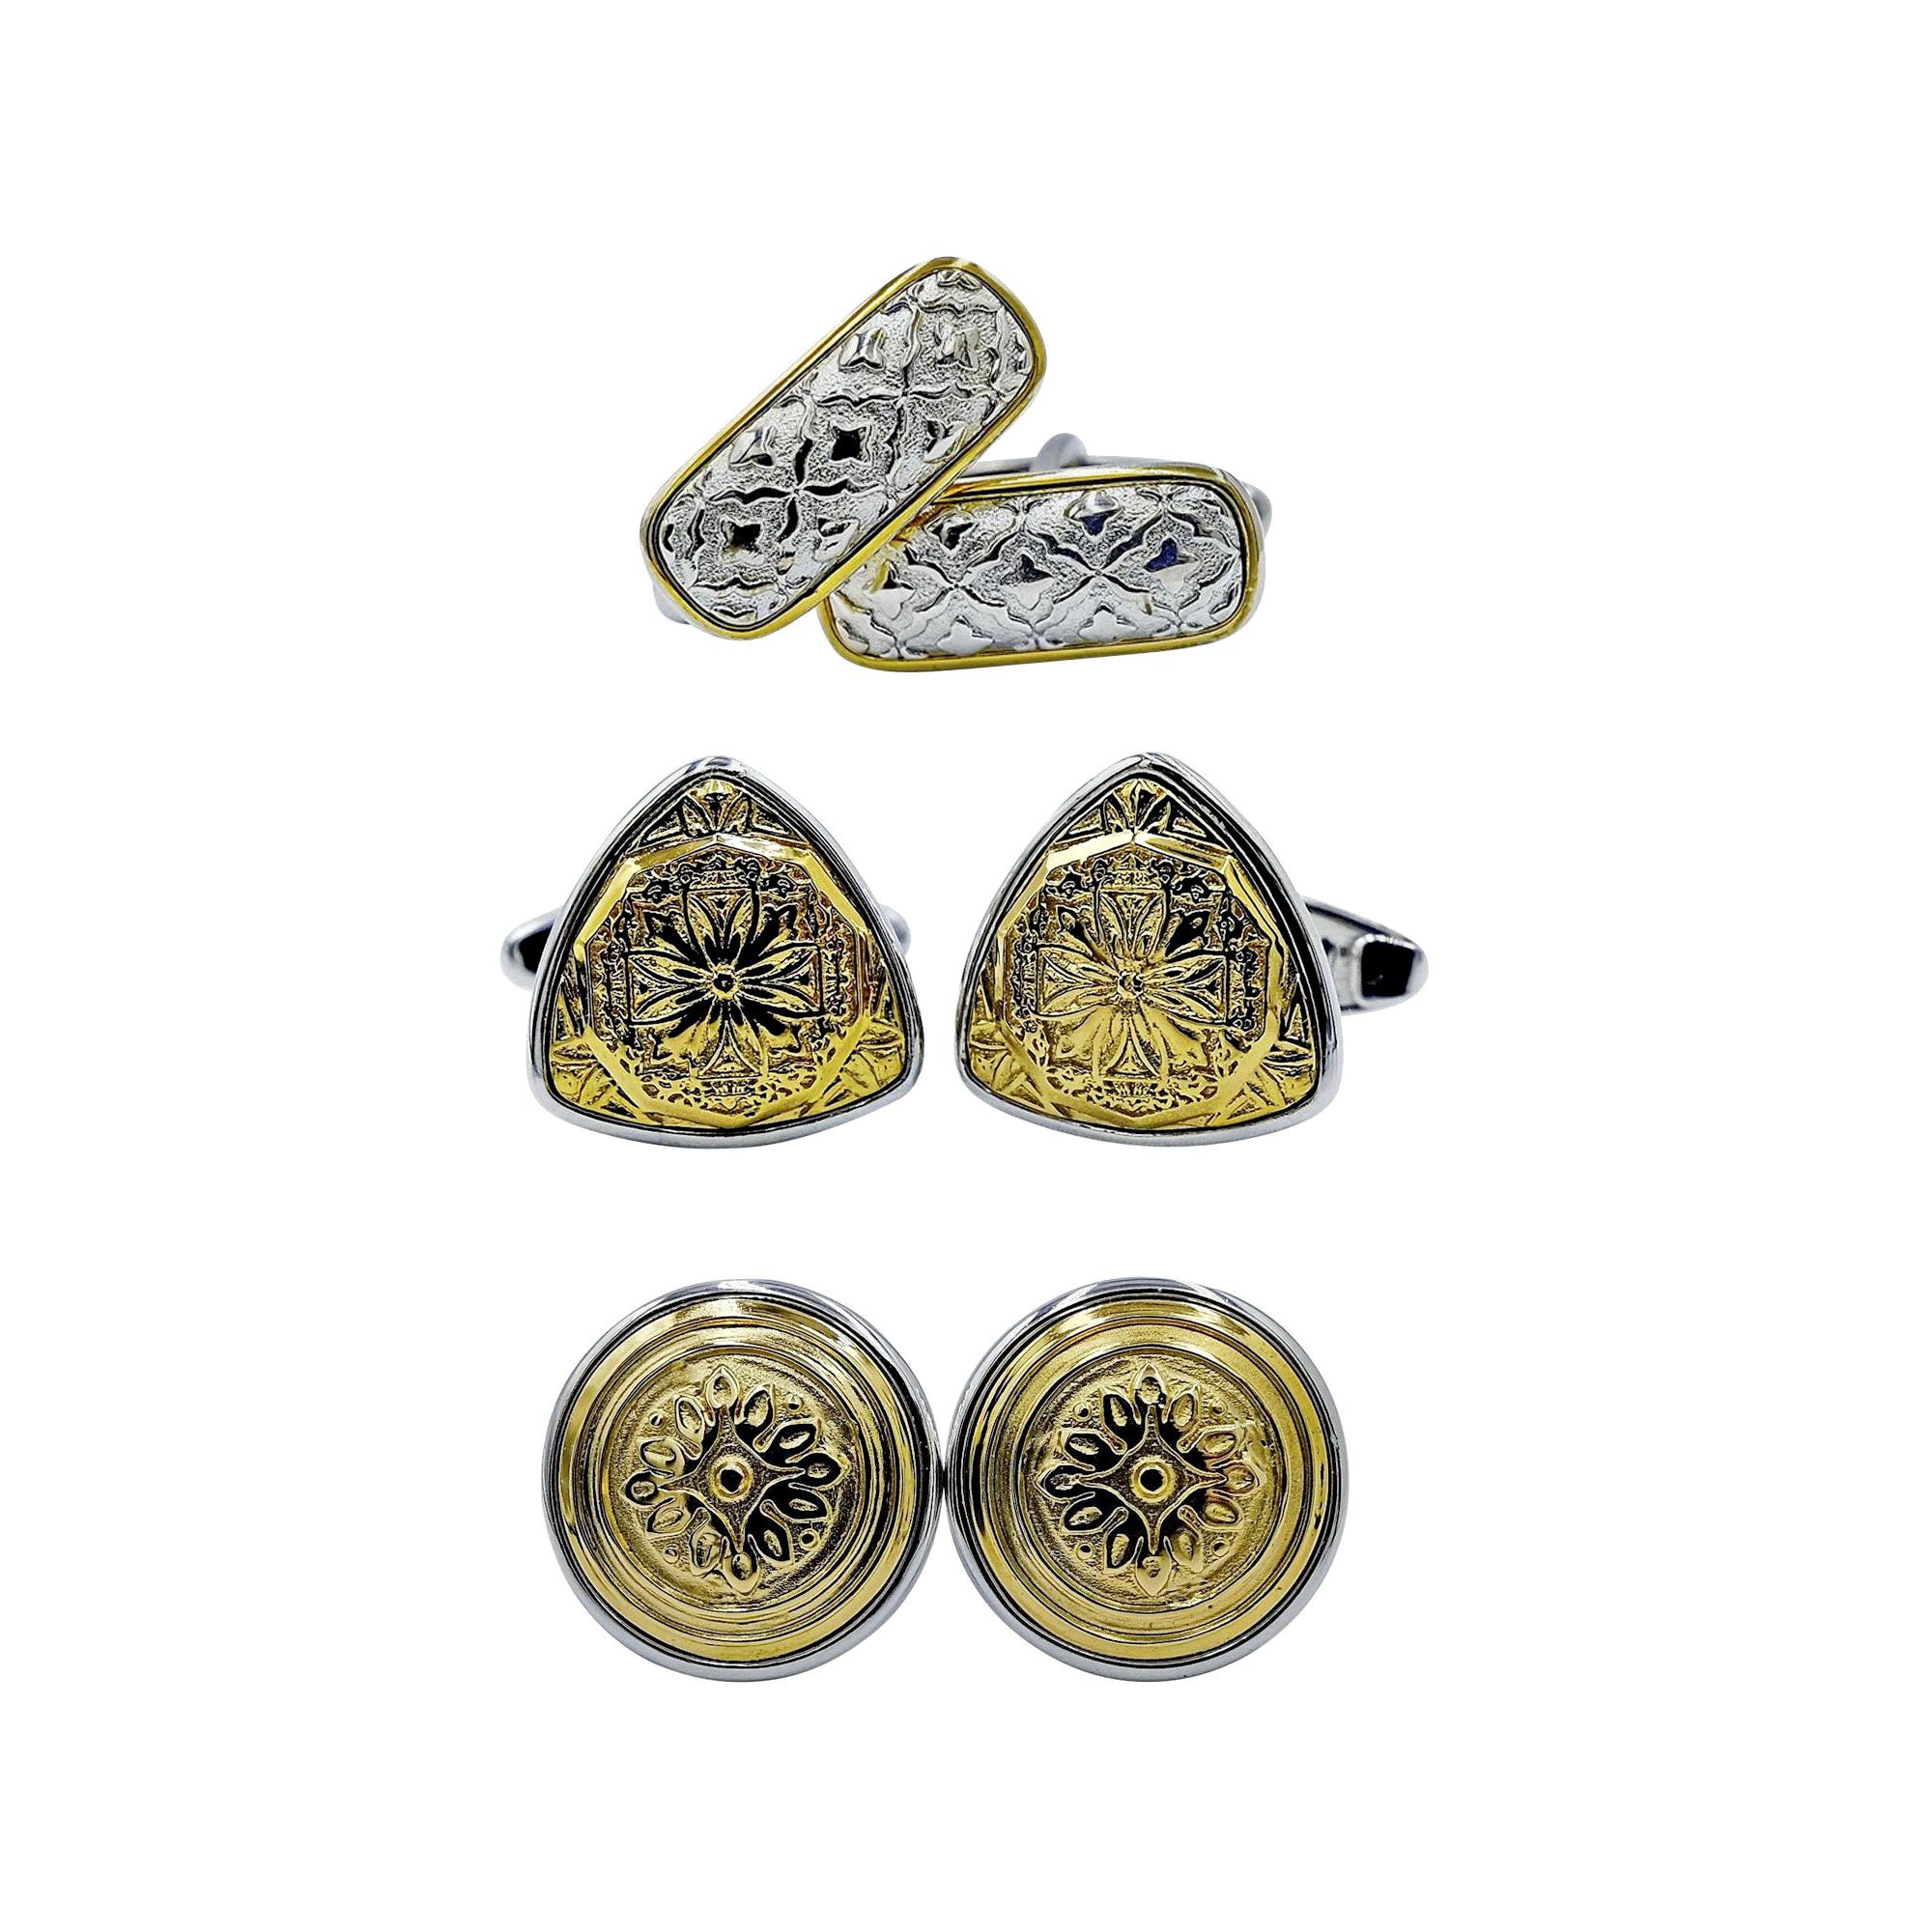 Luca Jouel Decorative Cufflinks Trio in Yellow Gold and Silver For Sale